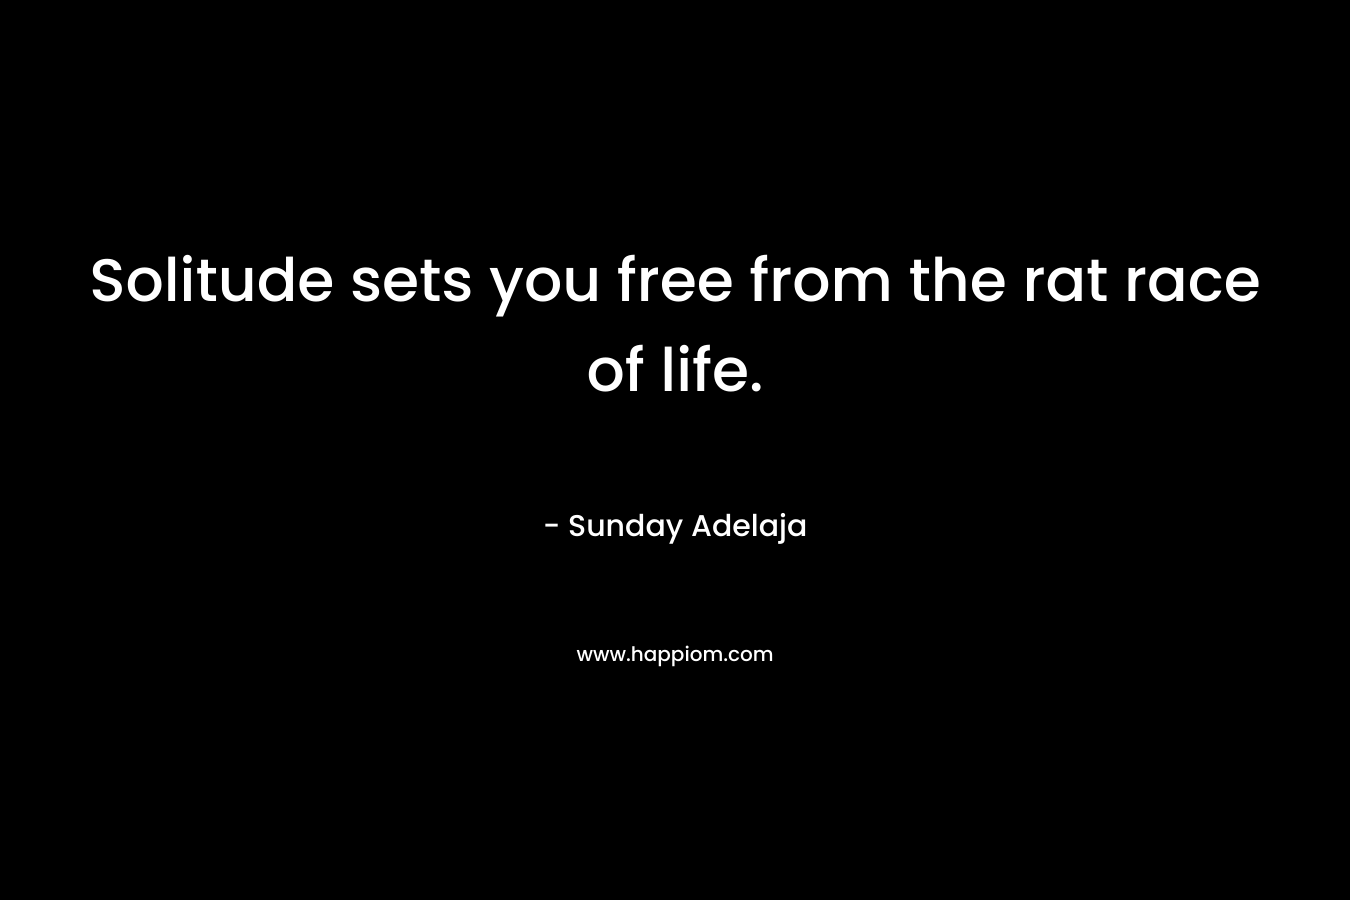 Solitude sets you free from the rat race of life.